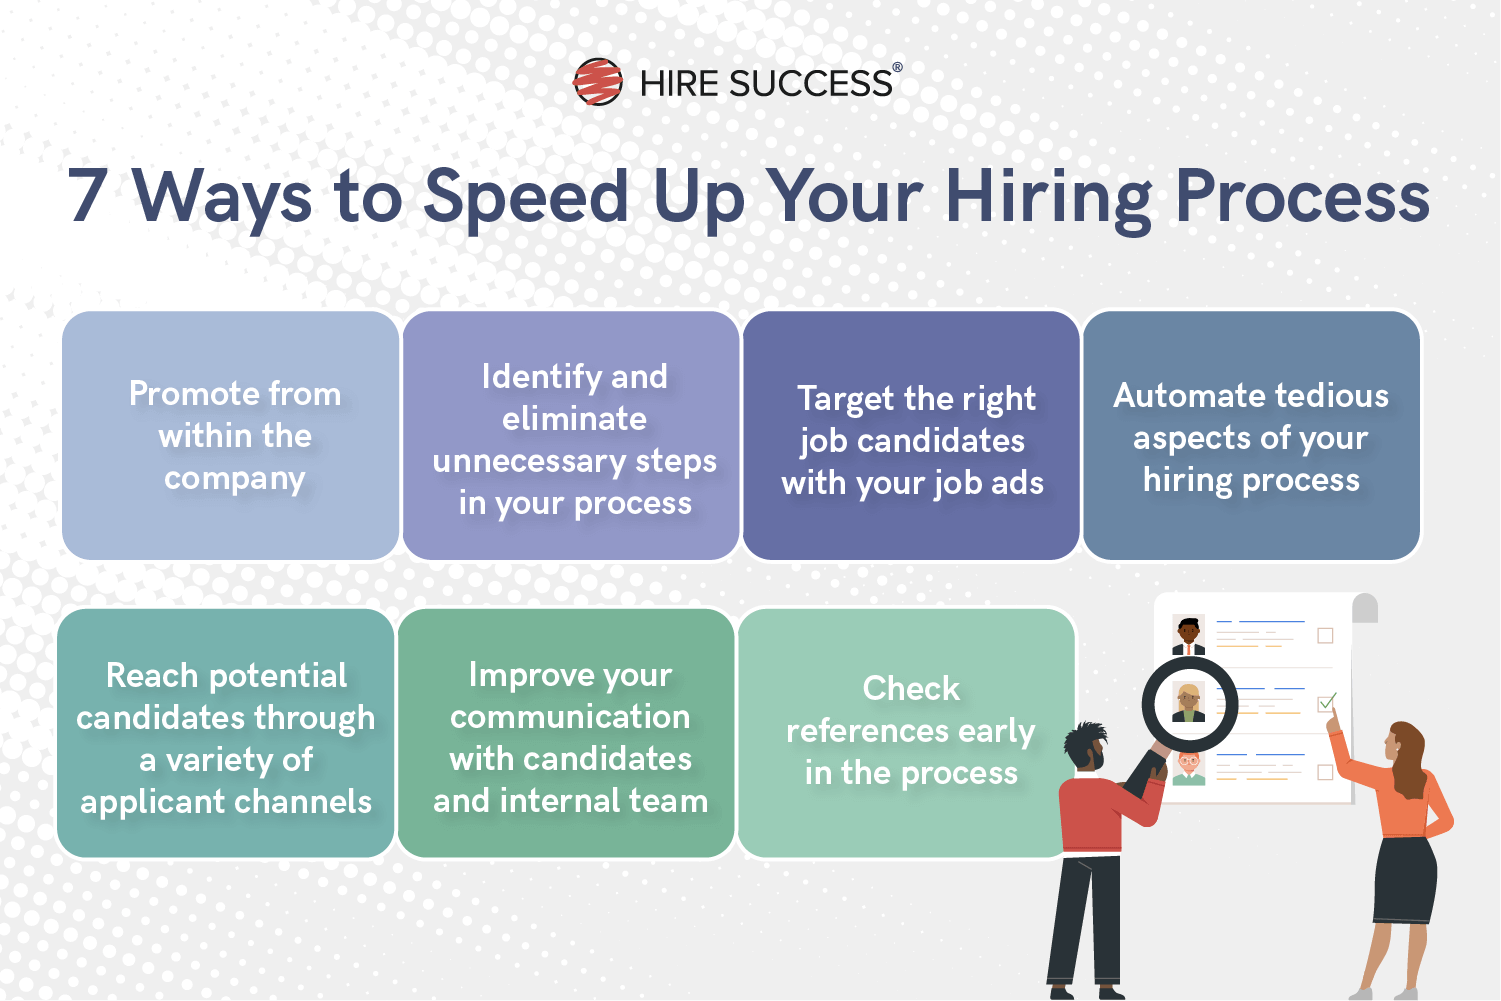 7 ways to speed up your hiring process